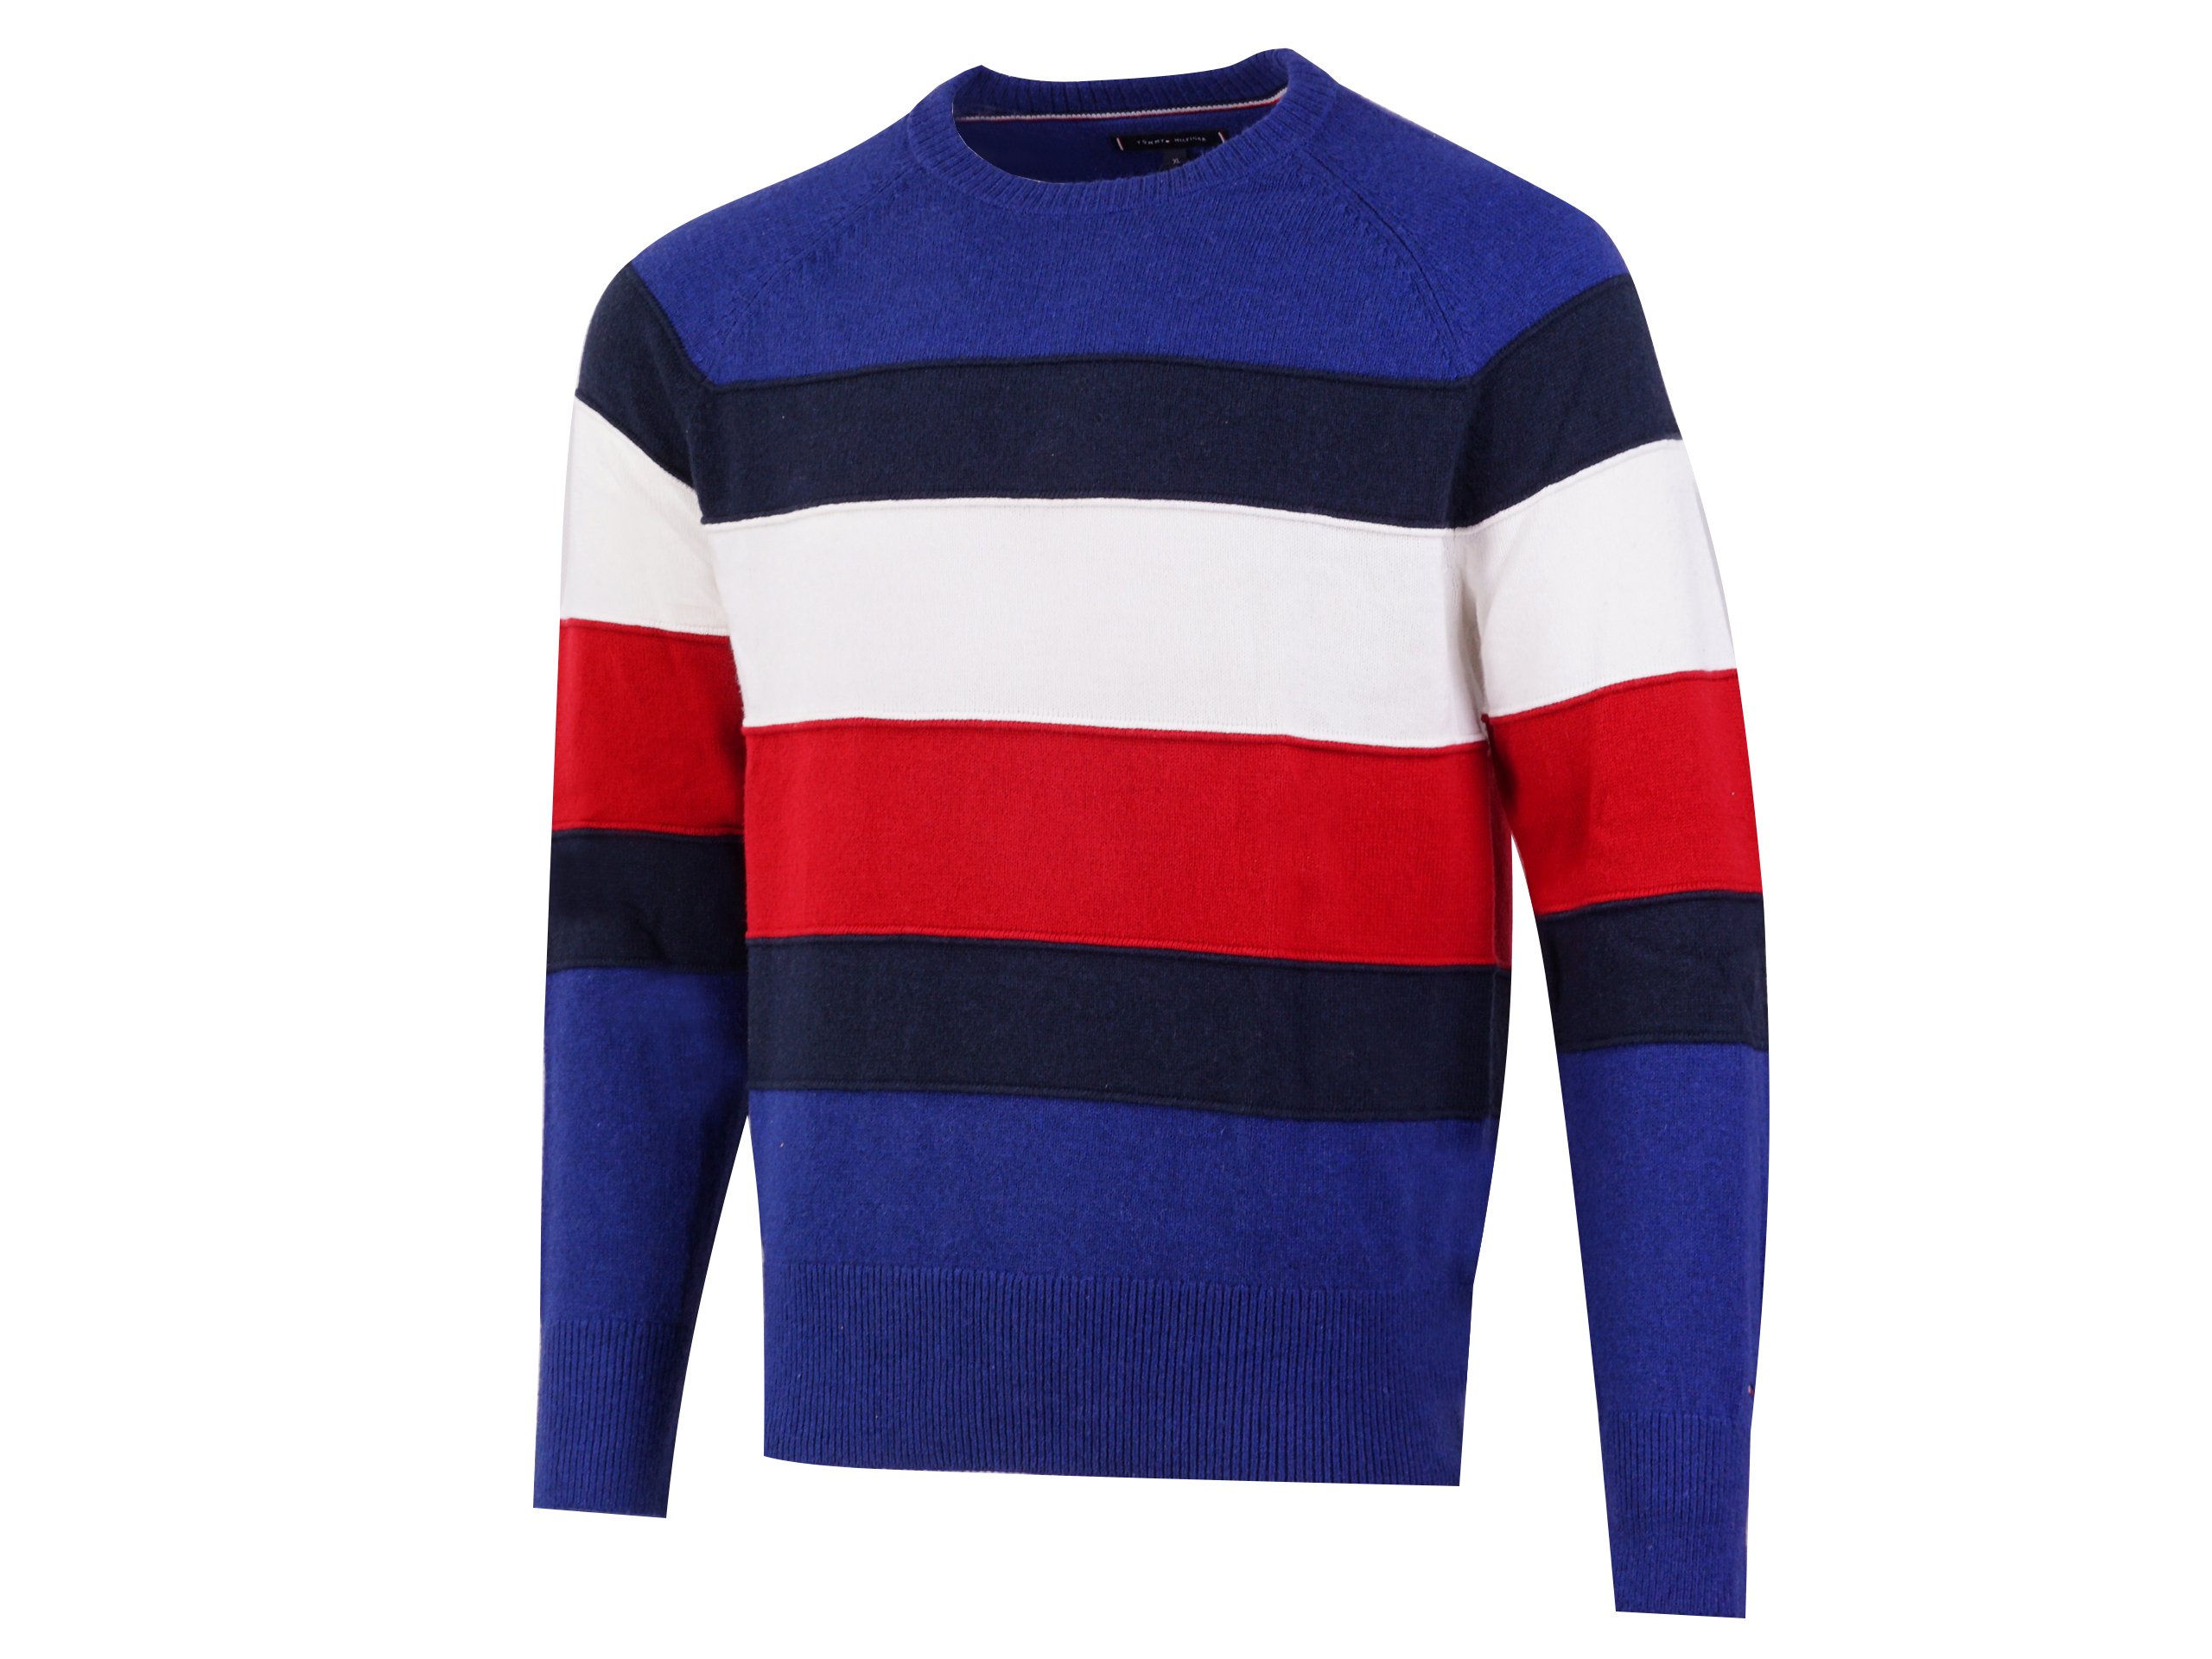 Tommy Hilfiger - Colorblock Stripe MW0MW07853-436 - Sweater - Navy / Blue /  Red / White | Mens \ Tommy Hilfiger | Kicks Sport - a trusted supplier of  branded sports footwear